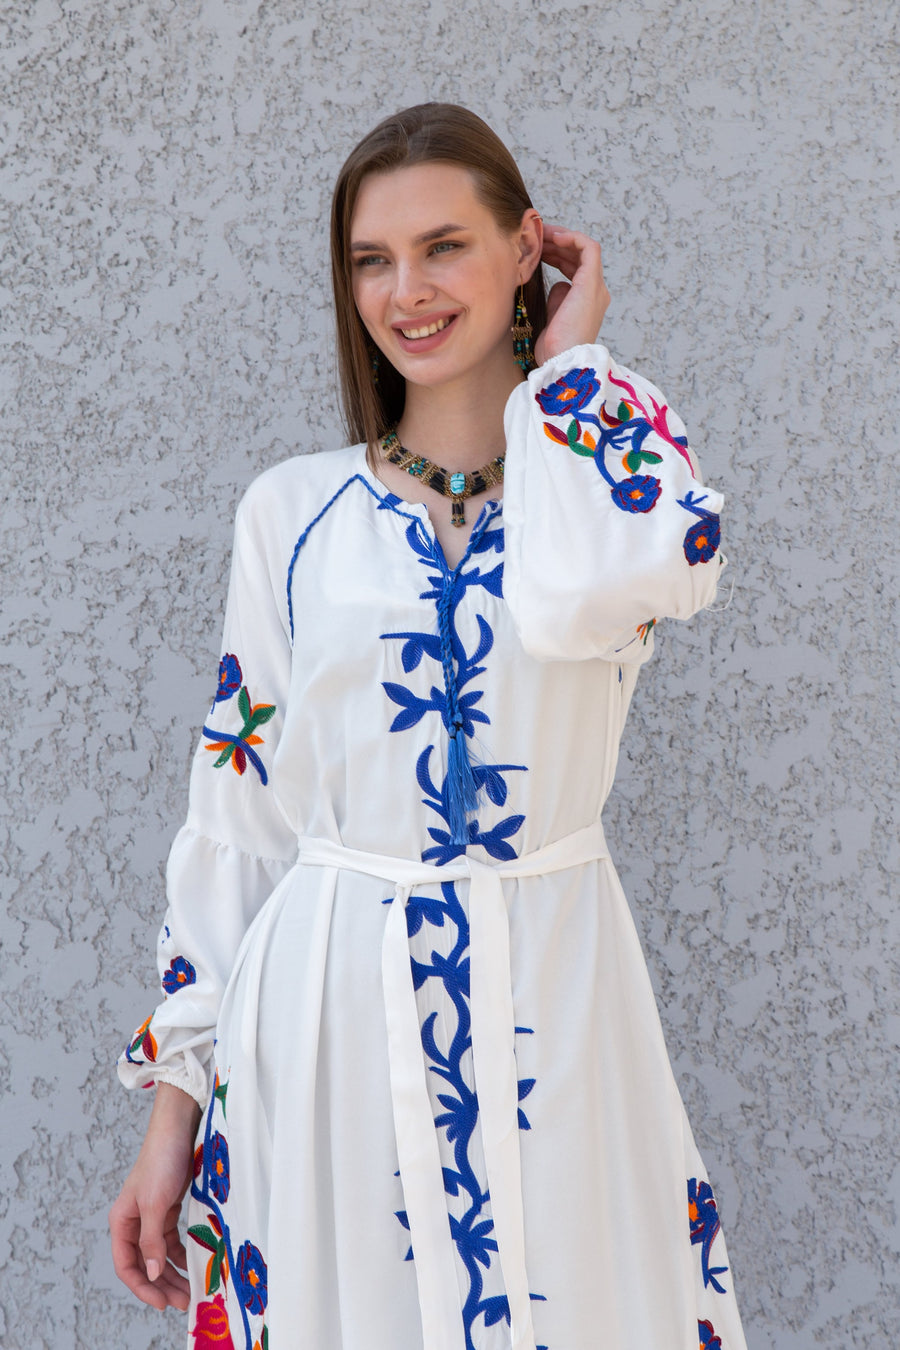 Midi White cotton kaftan dress, embroidered tunic dress, caftans for women, Egyptian cotton. Summer caftan, party, casual, home dress